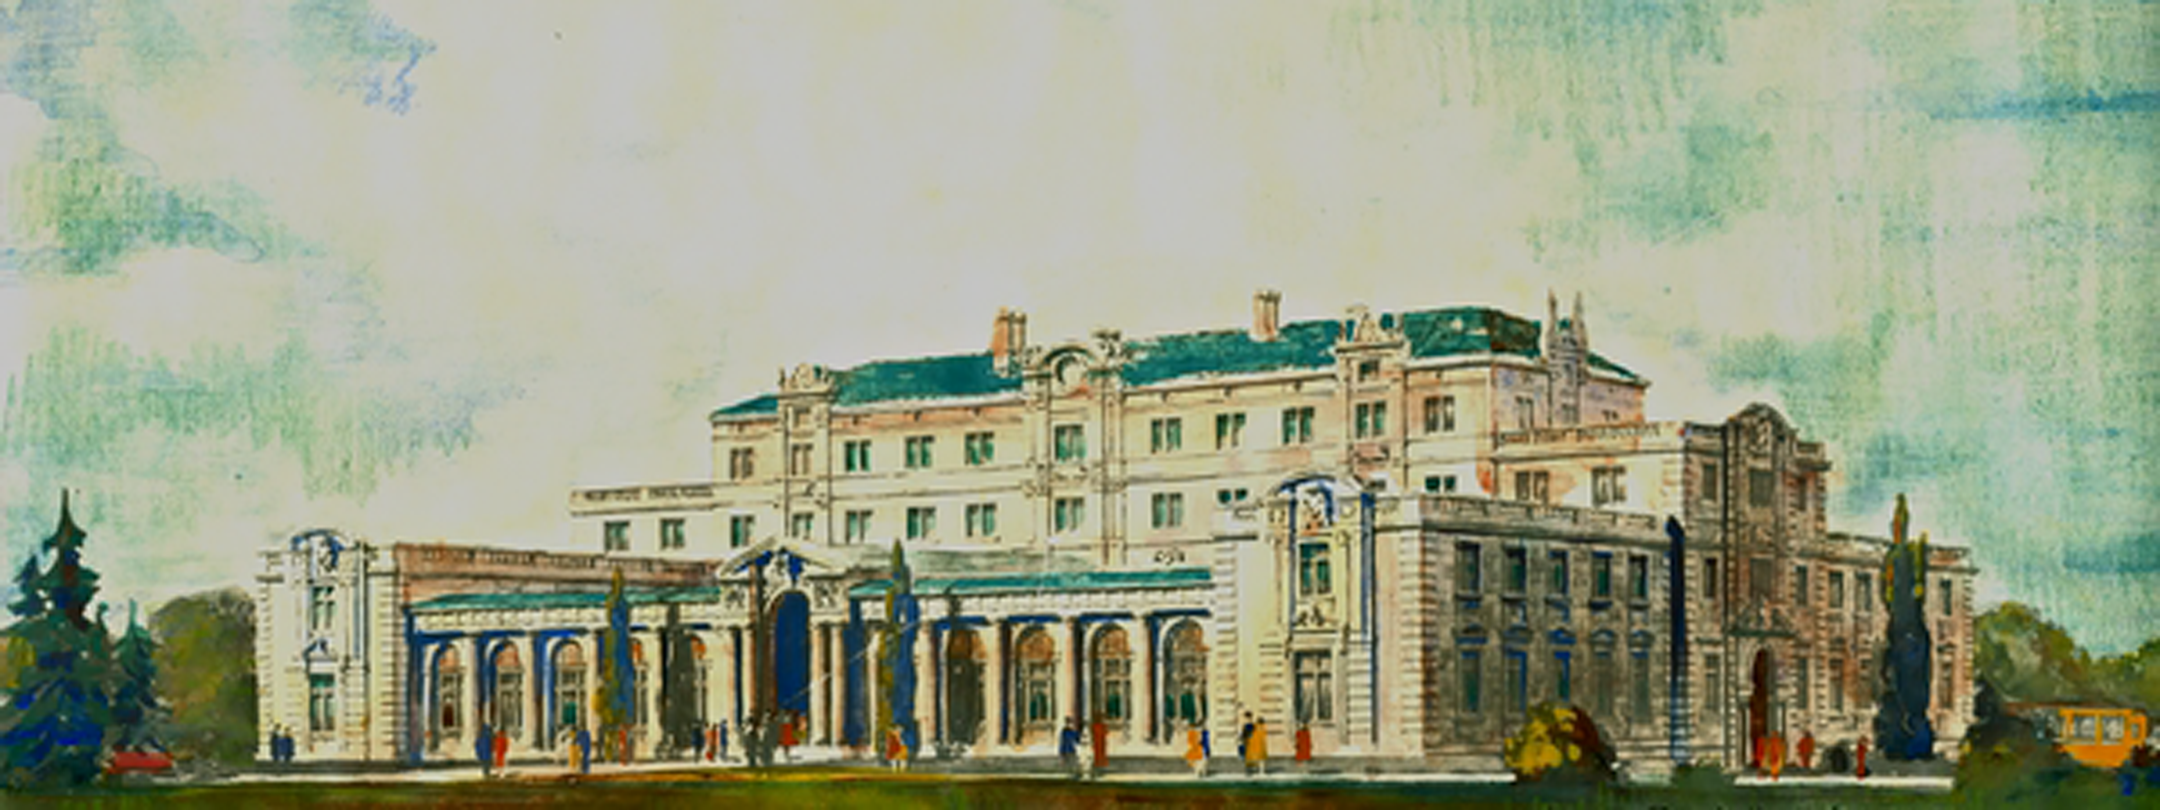 Architectural drawing by Proudfoot of the Memorial Union before being built